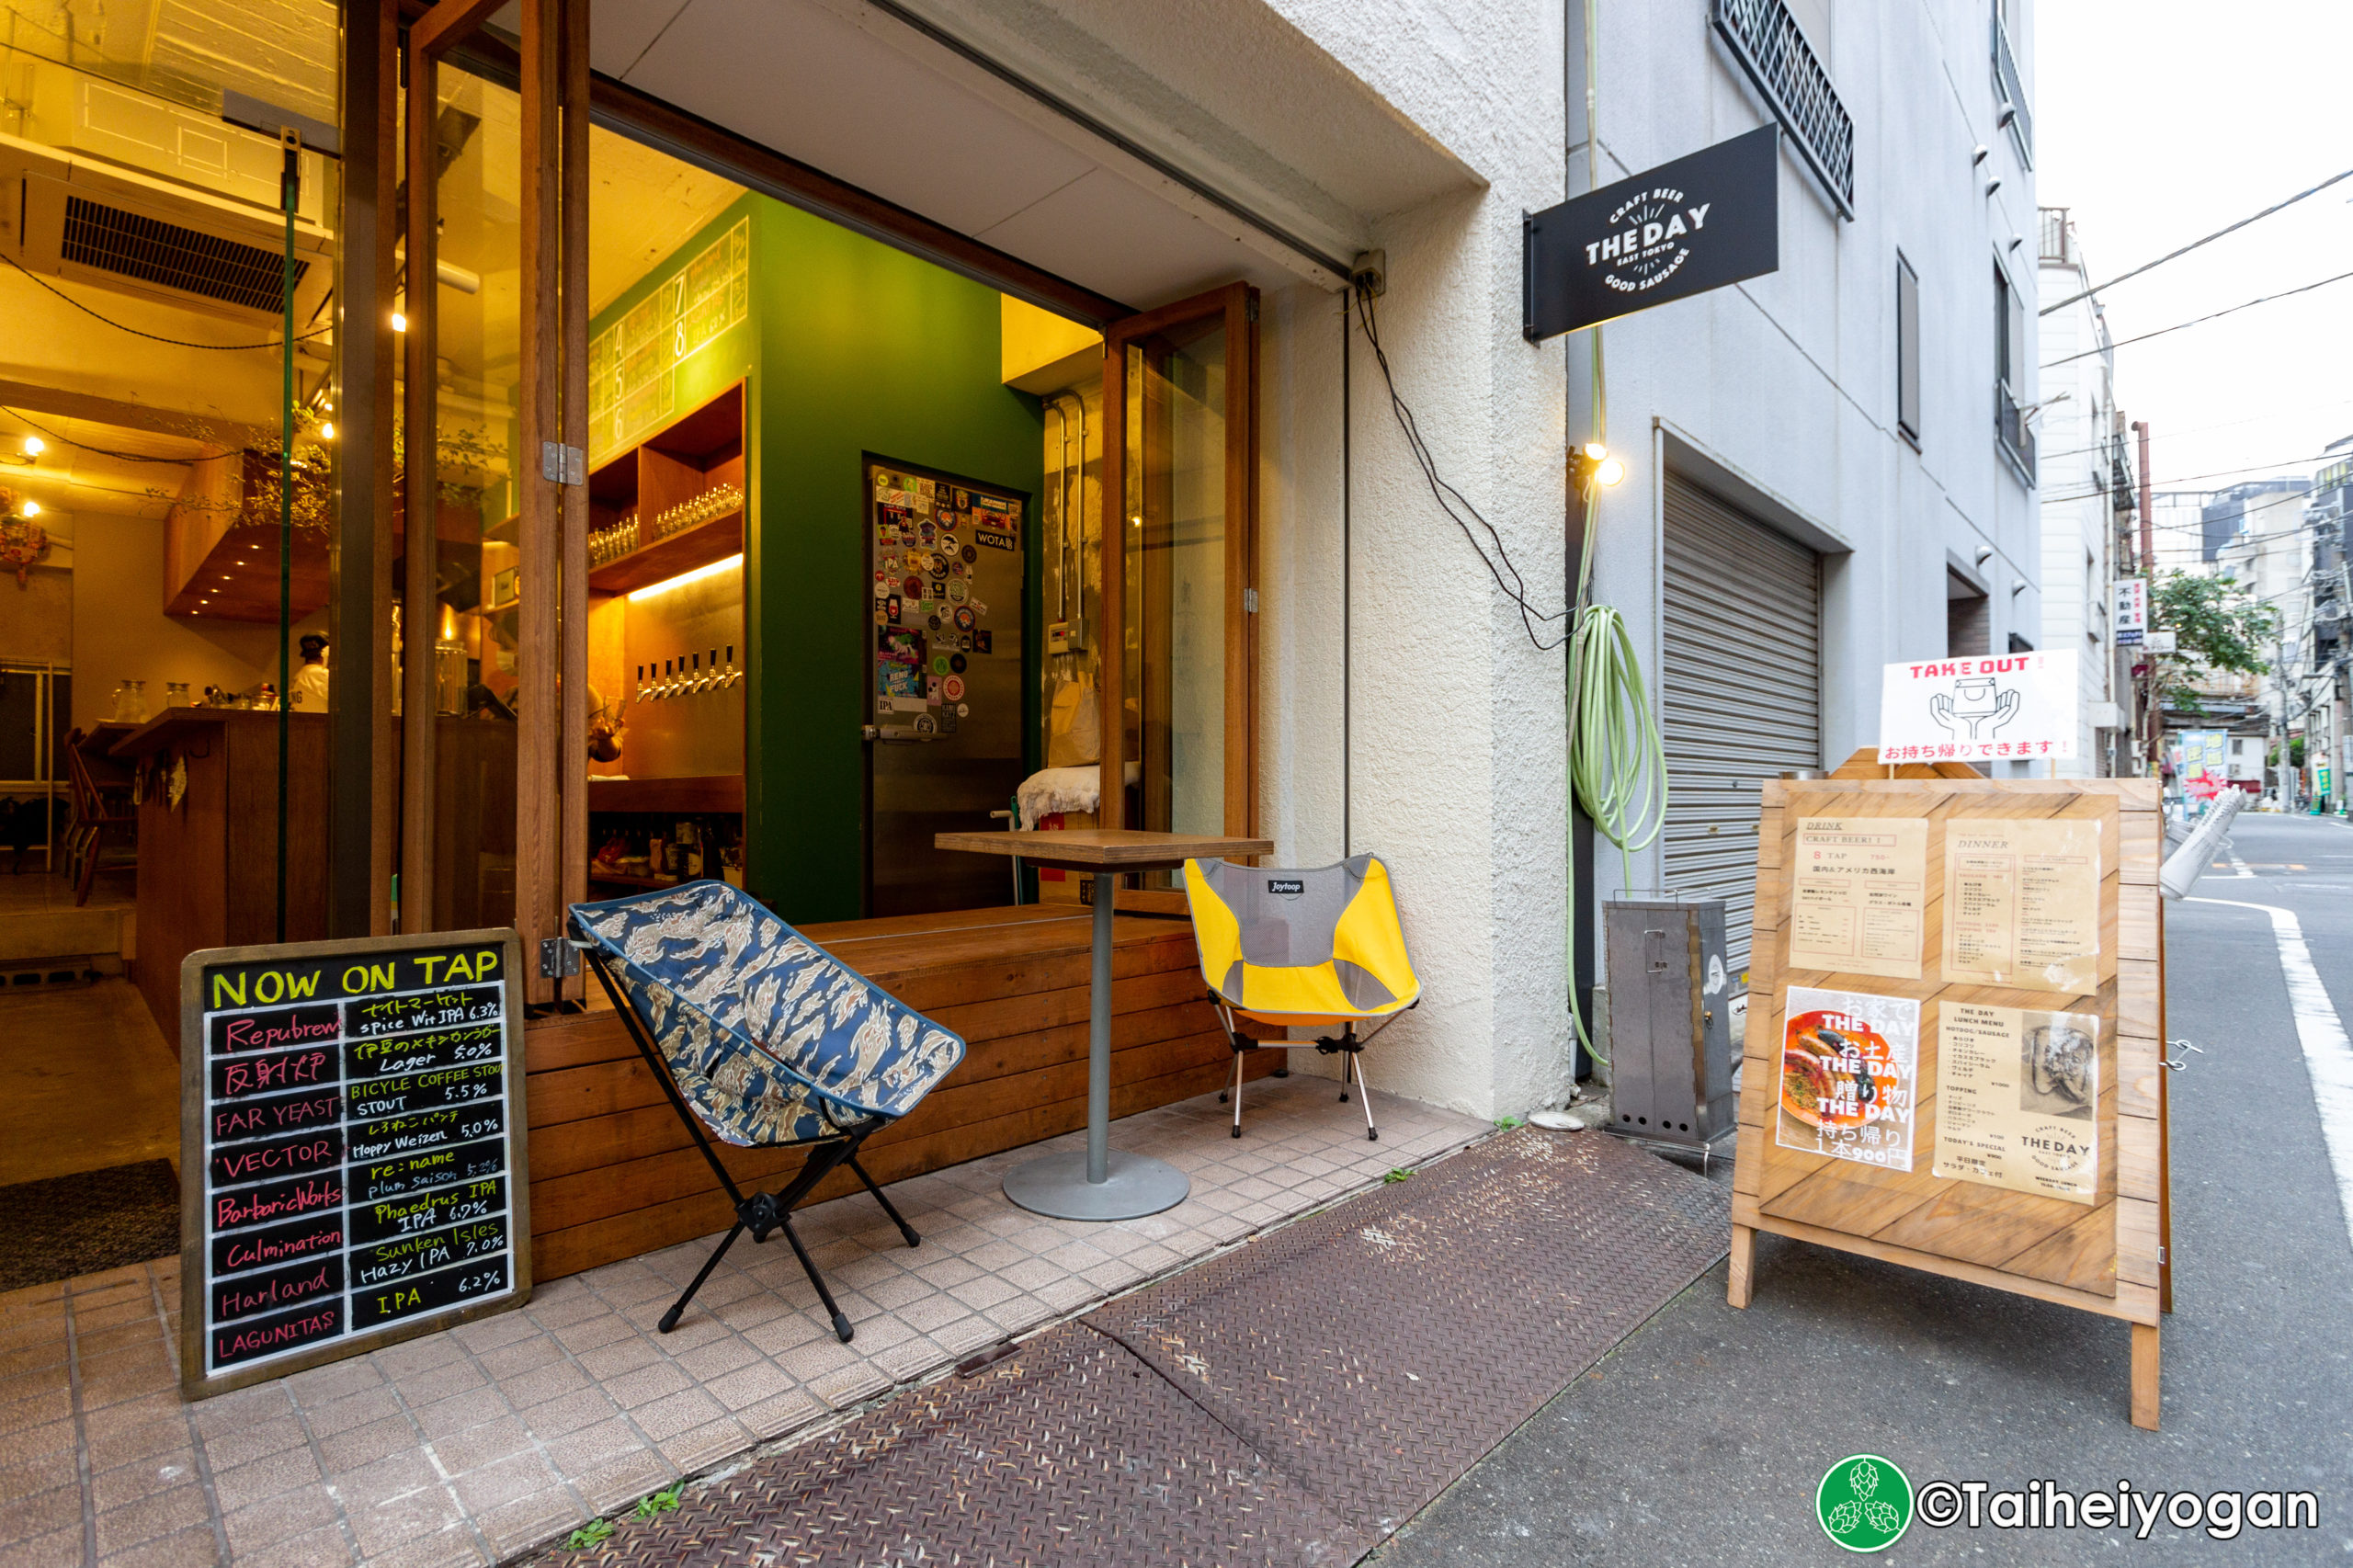 THE DAY east tokyo - Outdoor Seating